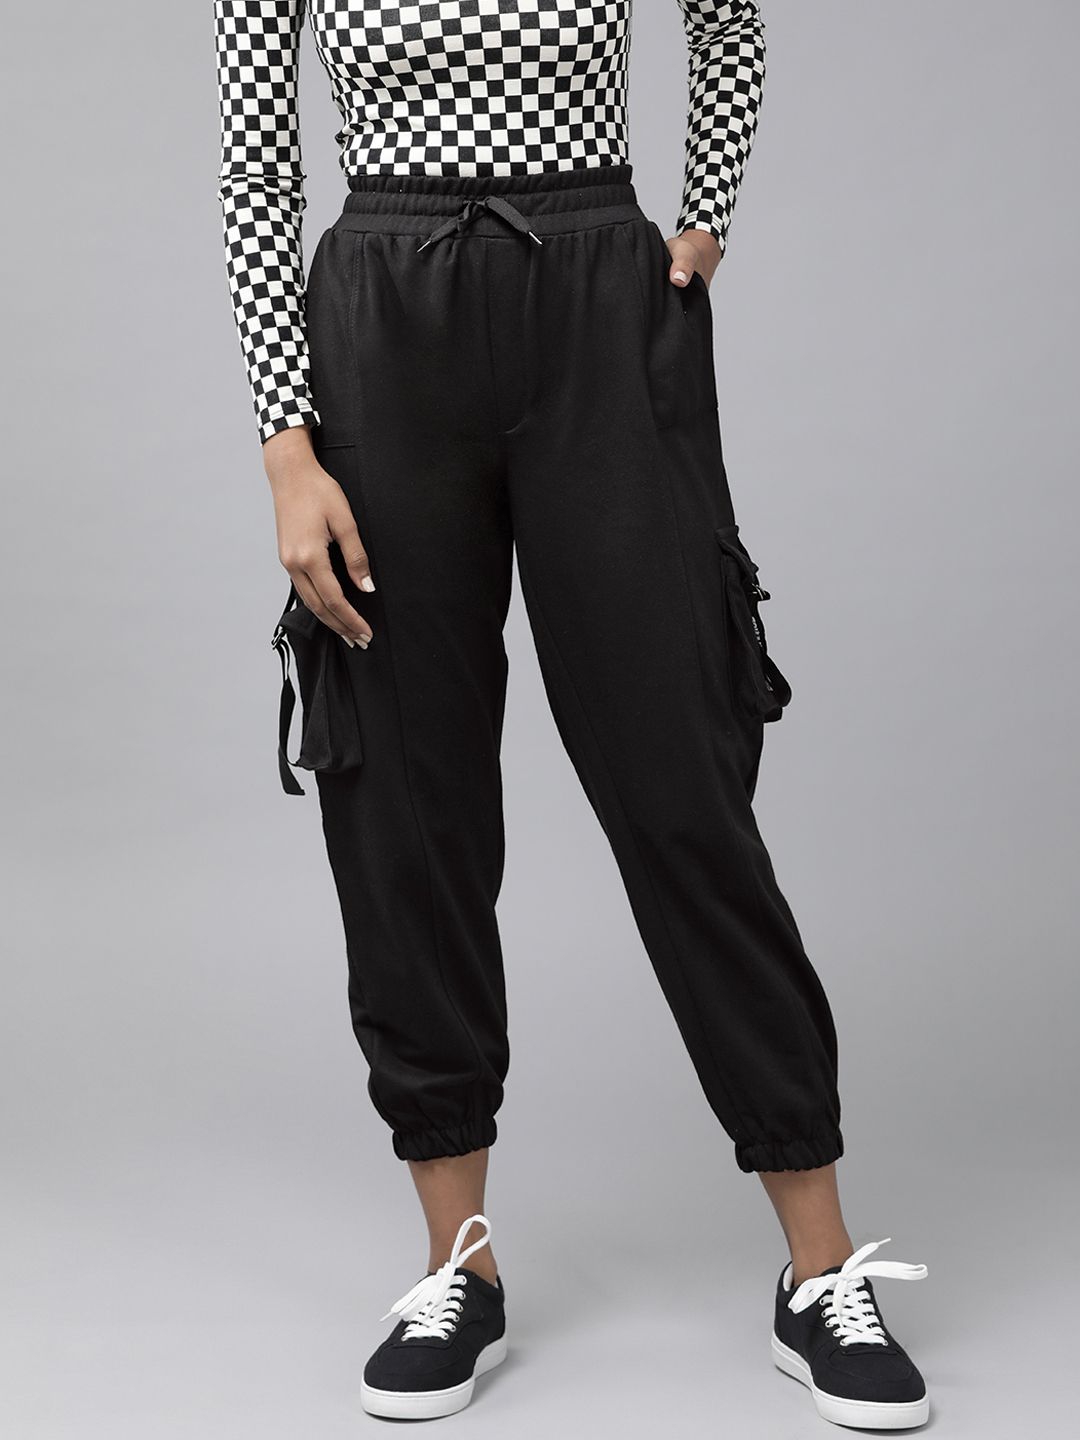 Roadster Women Black Pleated Cargos Trousers Price in India